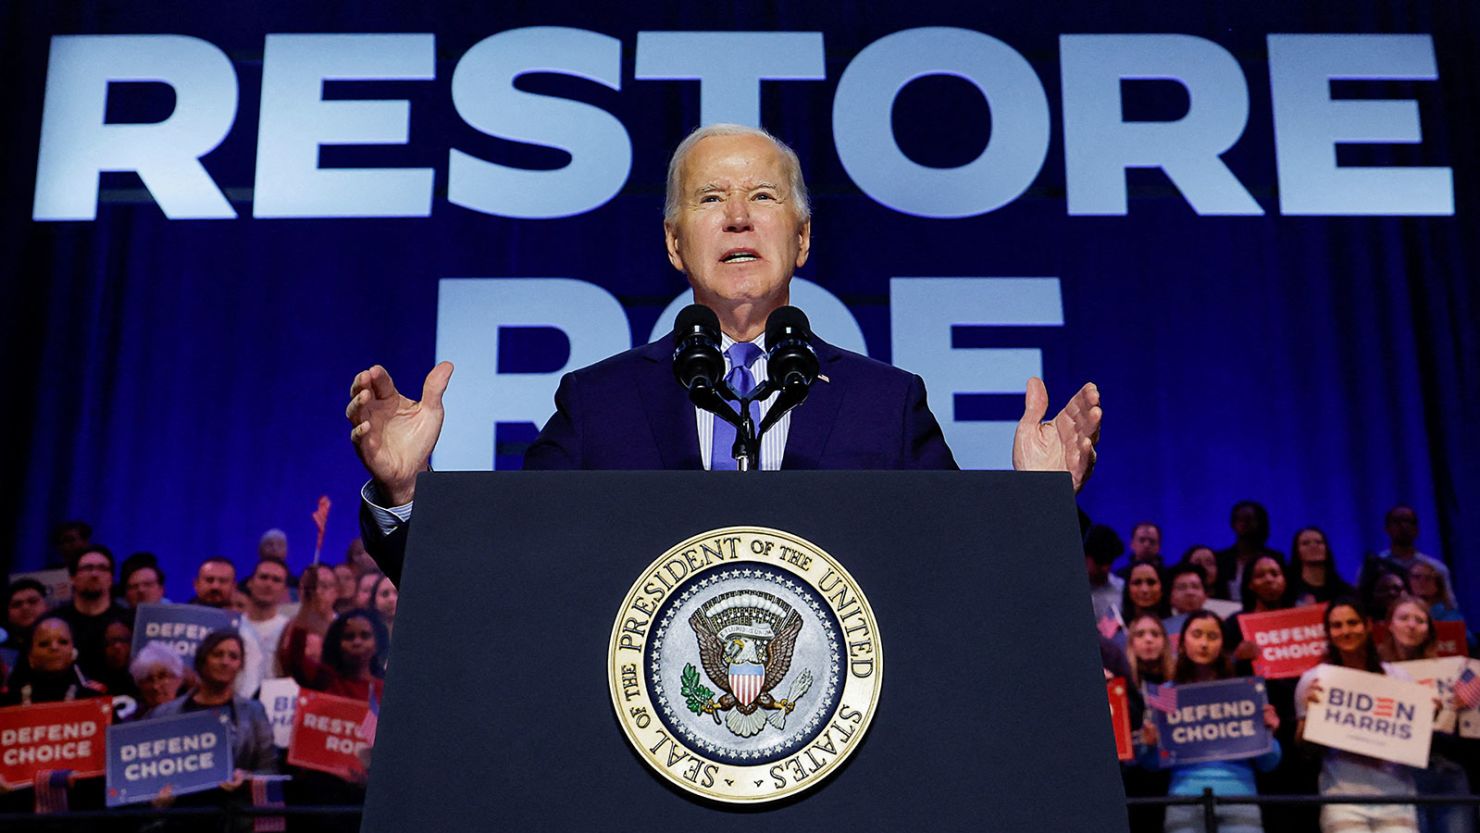 U.S. President Joe Biden delivers remarks, during a campaign event focusing on abortion rights at the Hylton Performing Arts Center, in Manassas, Virginia, U.S., January 23, 2024.